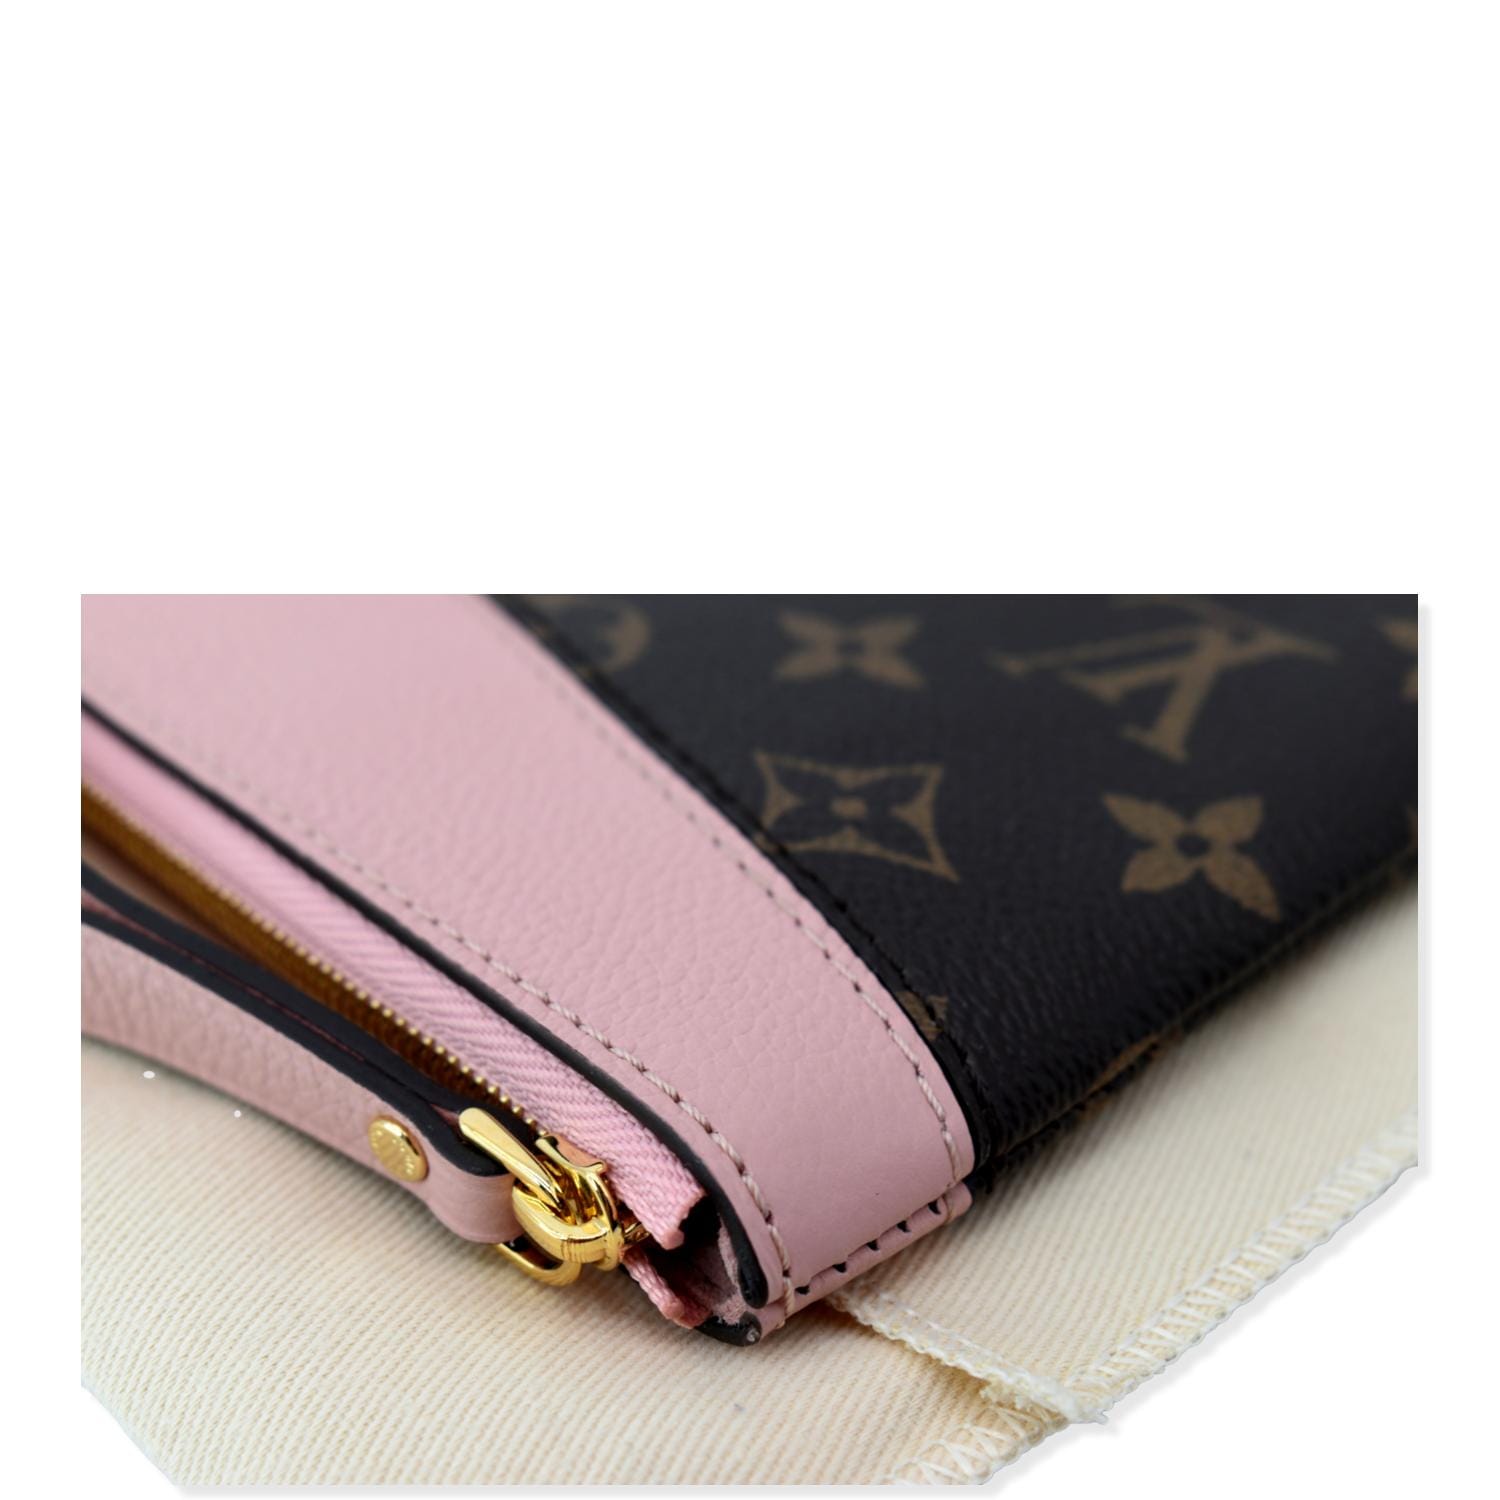 Louis Vuitton Daily Pouch - Couture USA